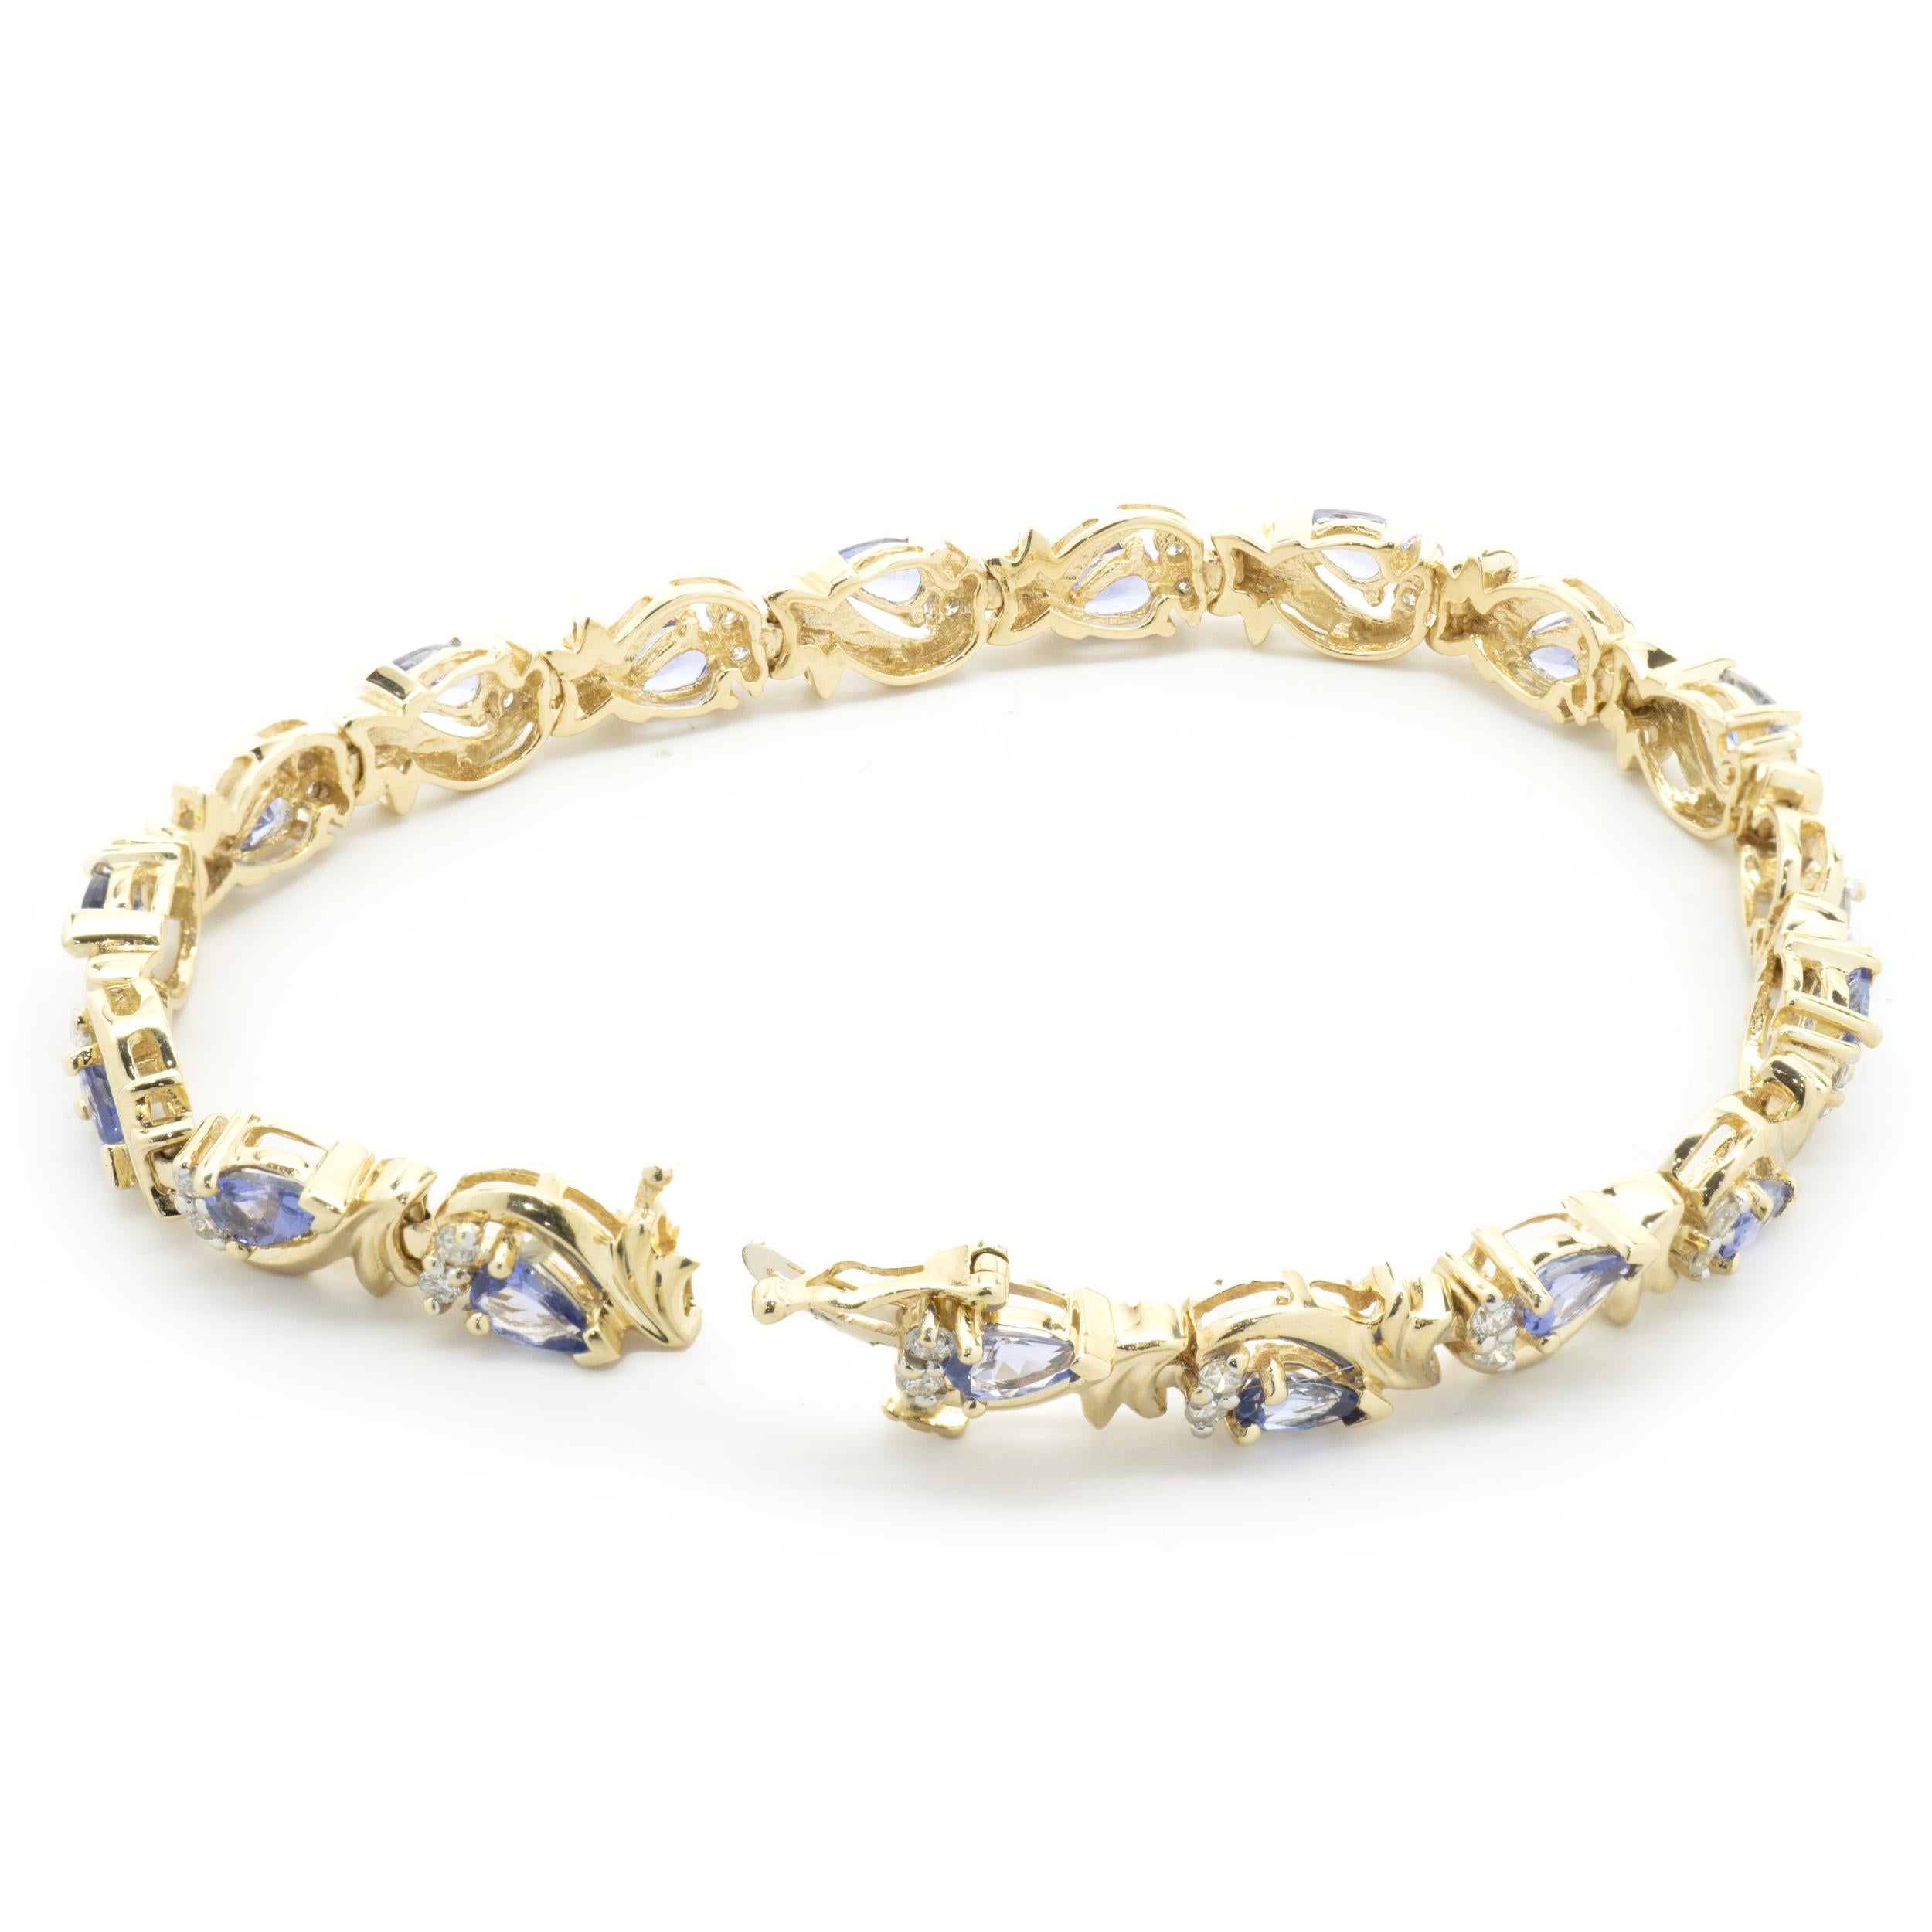 Designer: custom
Material: 14K yellow gold
Diamond: 36 round cut = 0.36cttw
Color: H 
Clarity: SI1
Tanzanite: 18 pear cut = 2.88cttw
Weight:  13.60 grams
Dimensions: bracelet will fit up to a 6.5-inch wrist